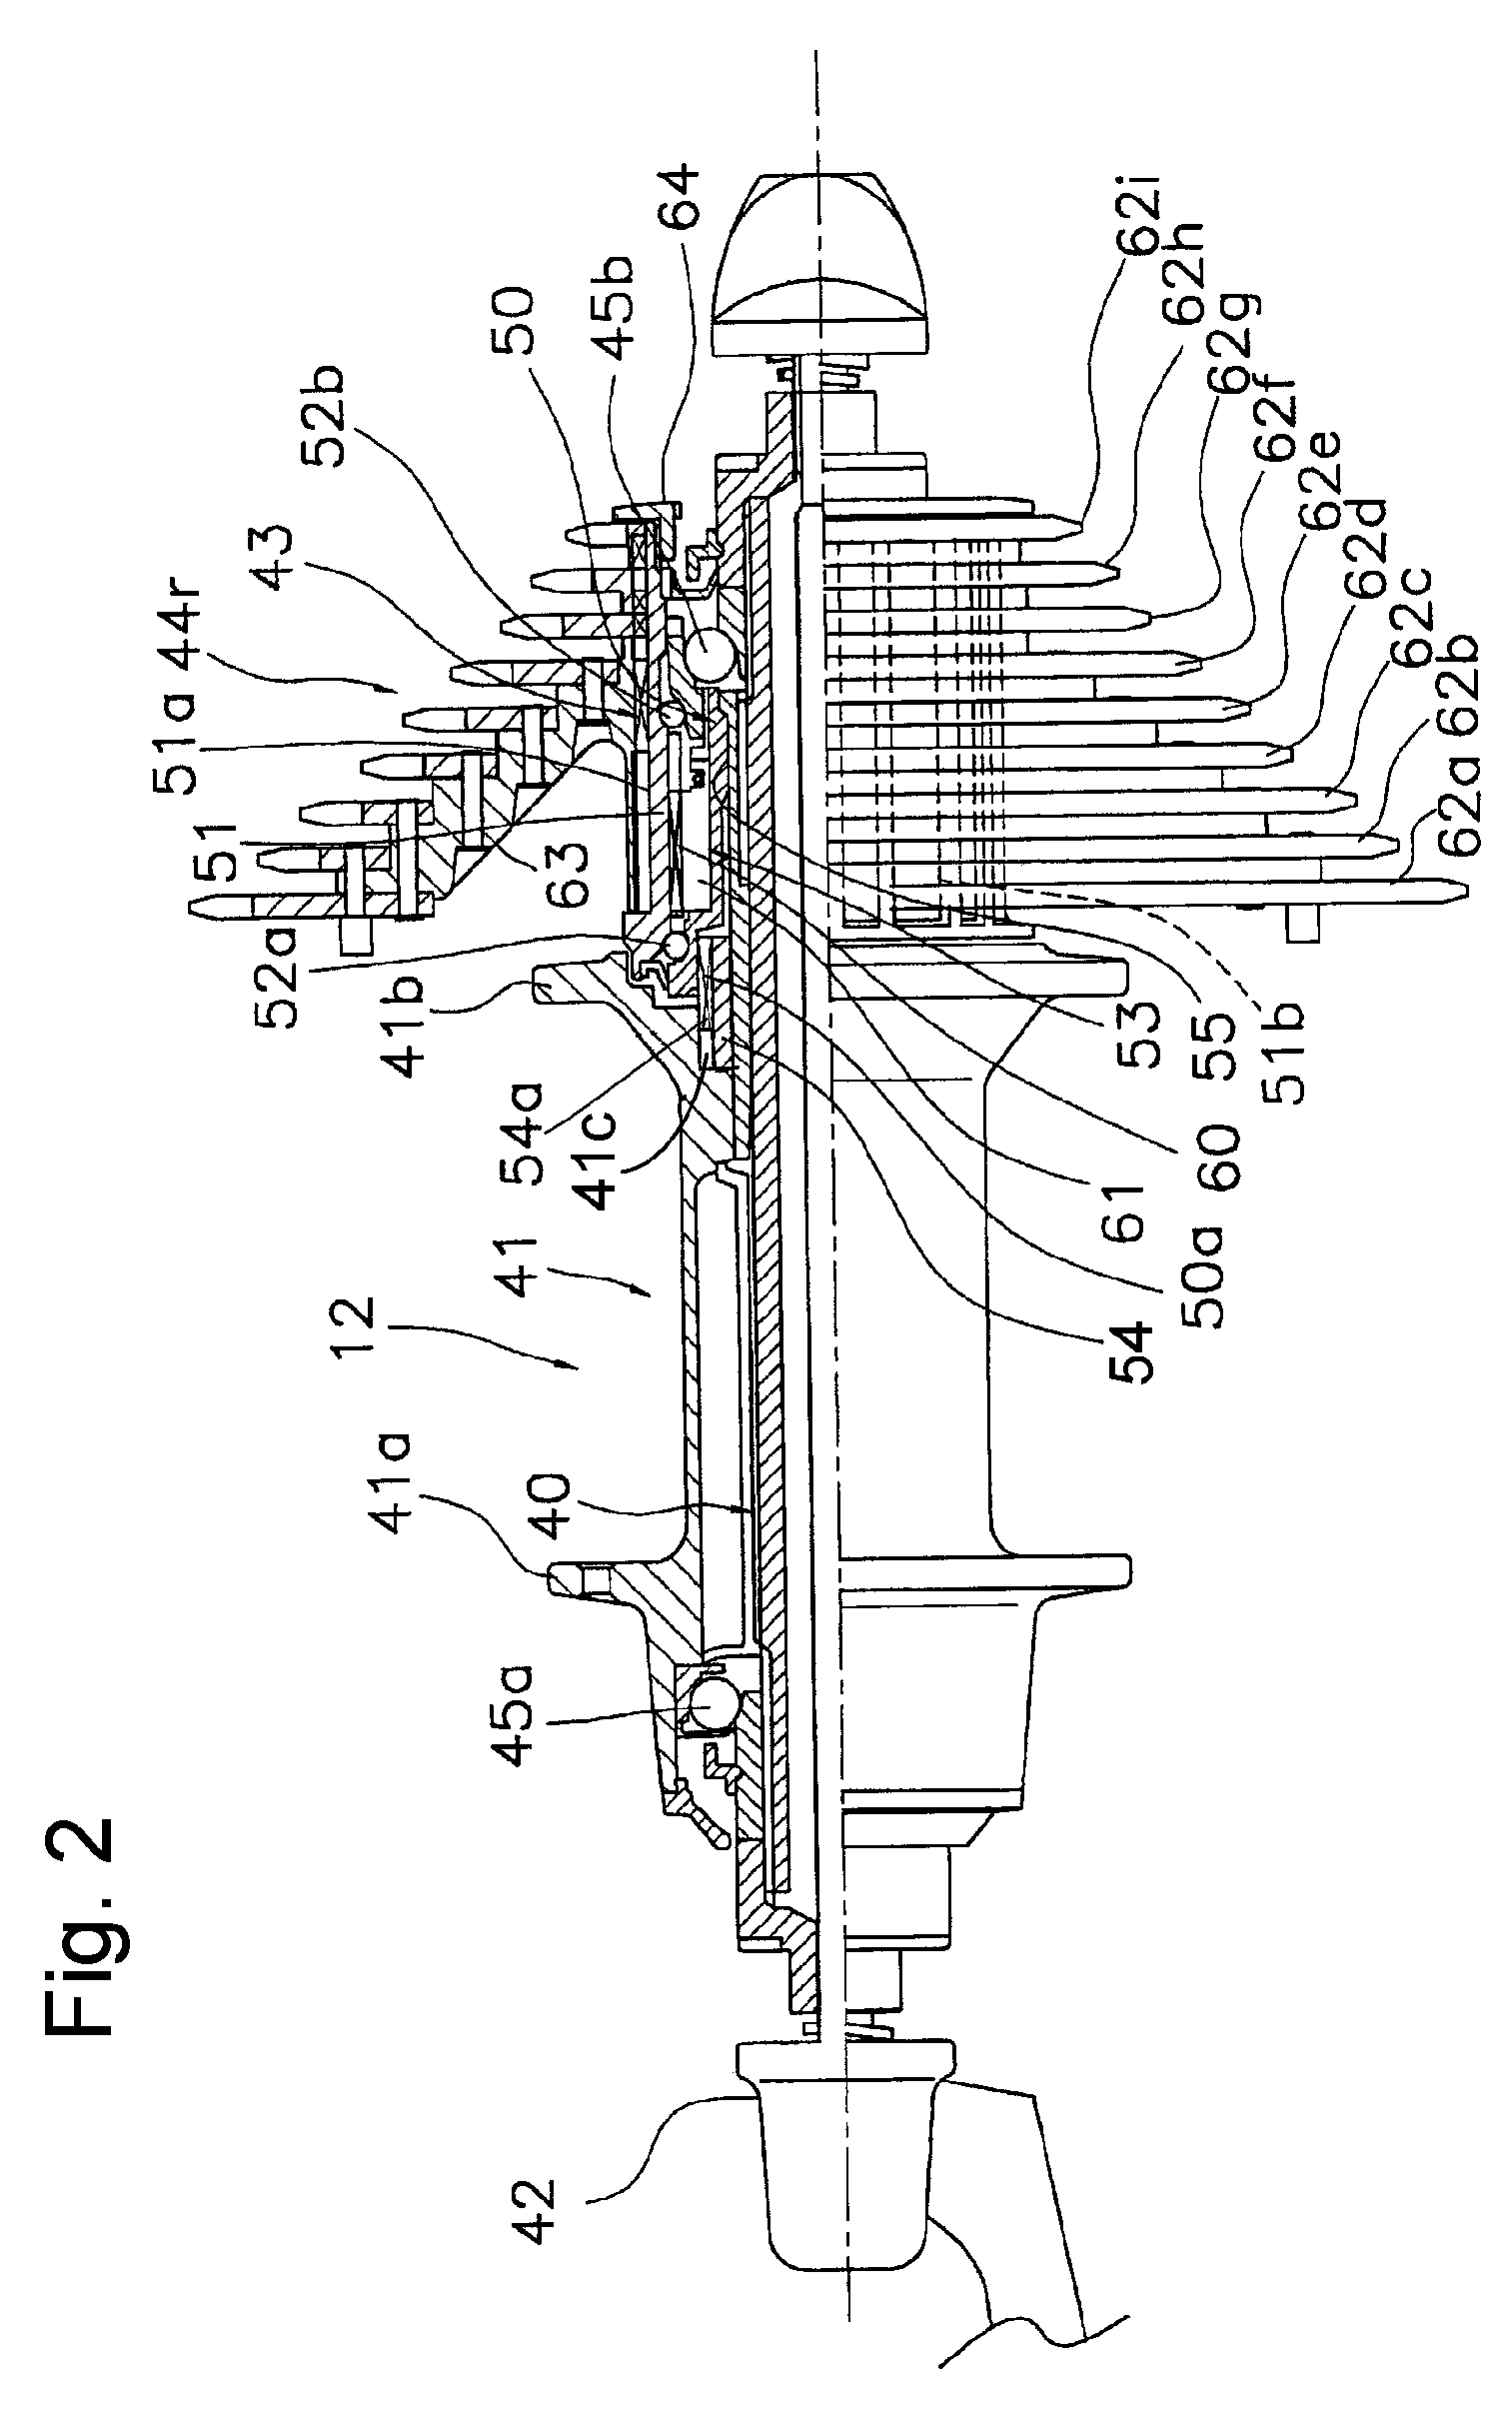 Bicycle sprocket apparatus with a chain support structure